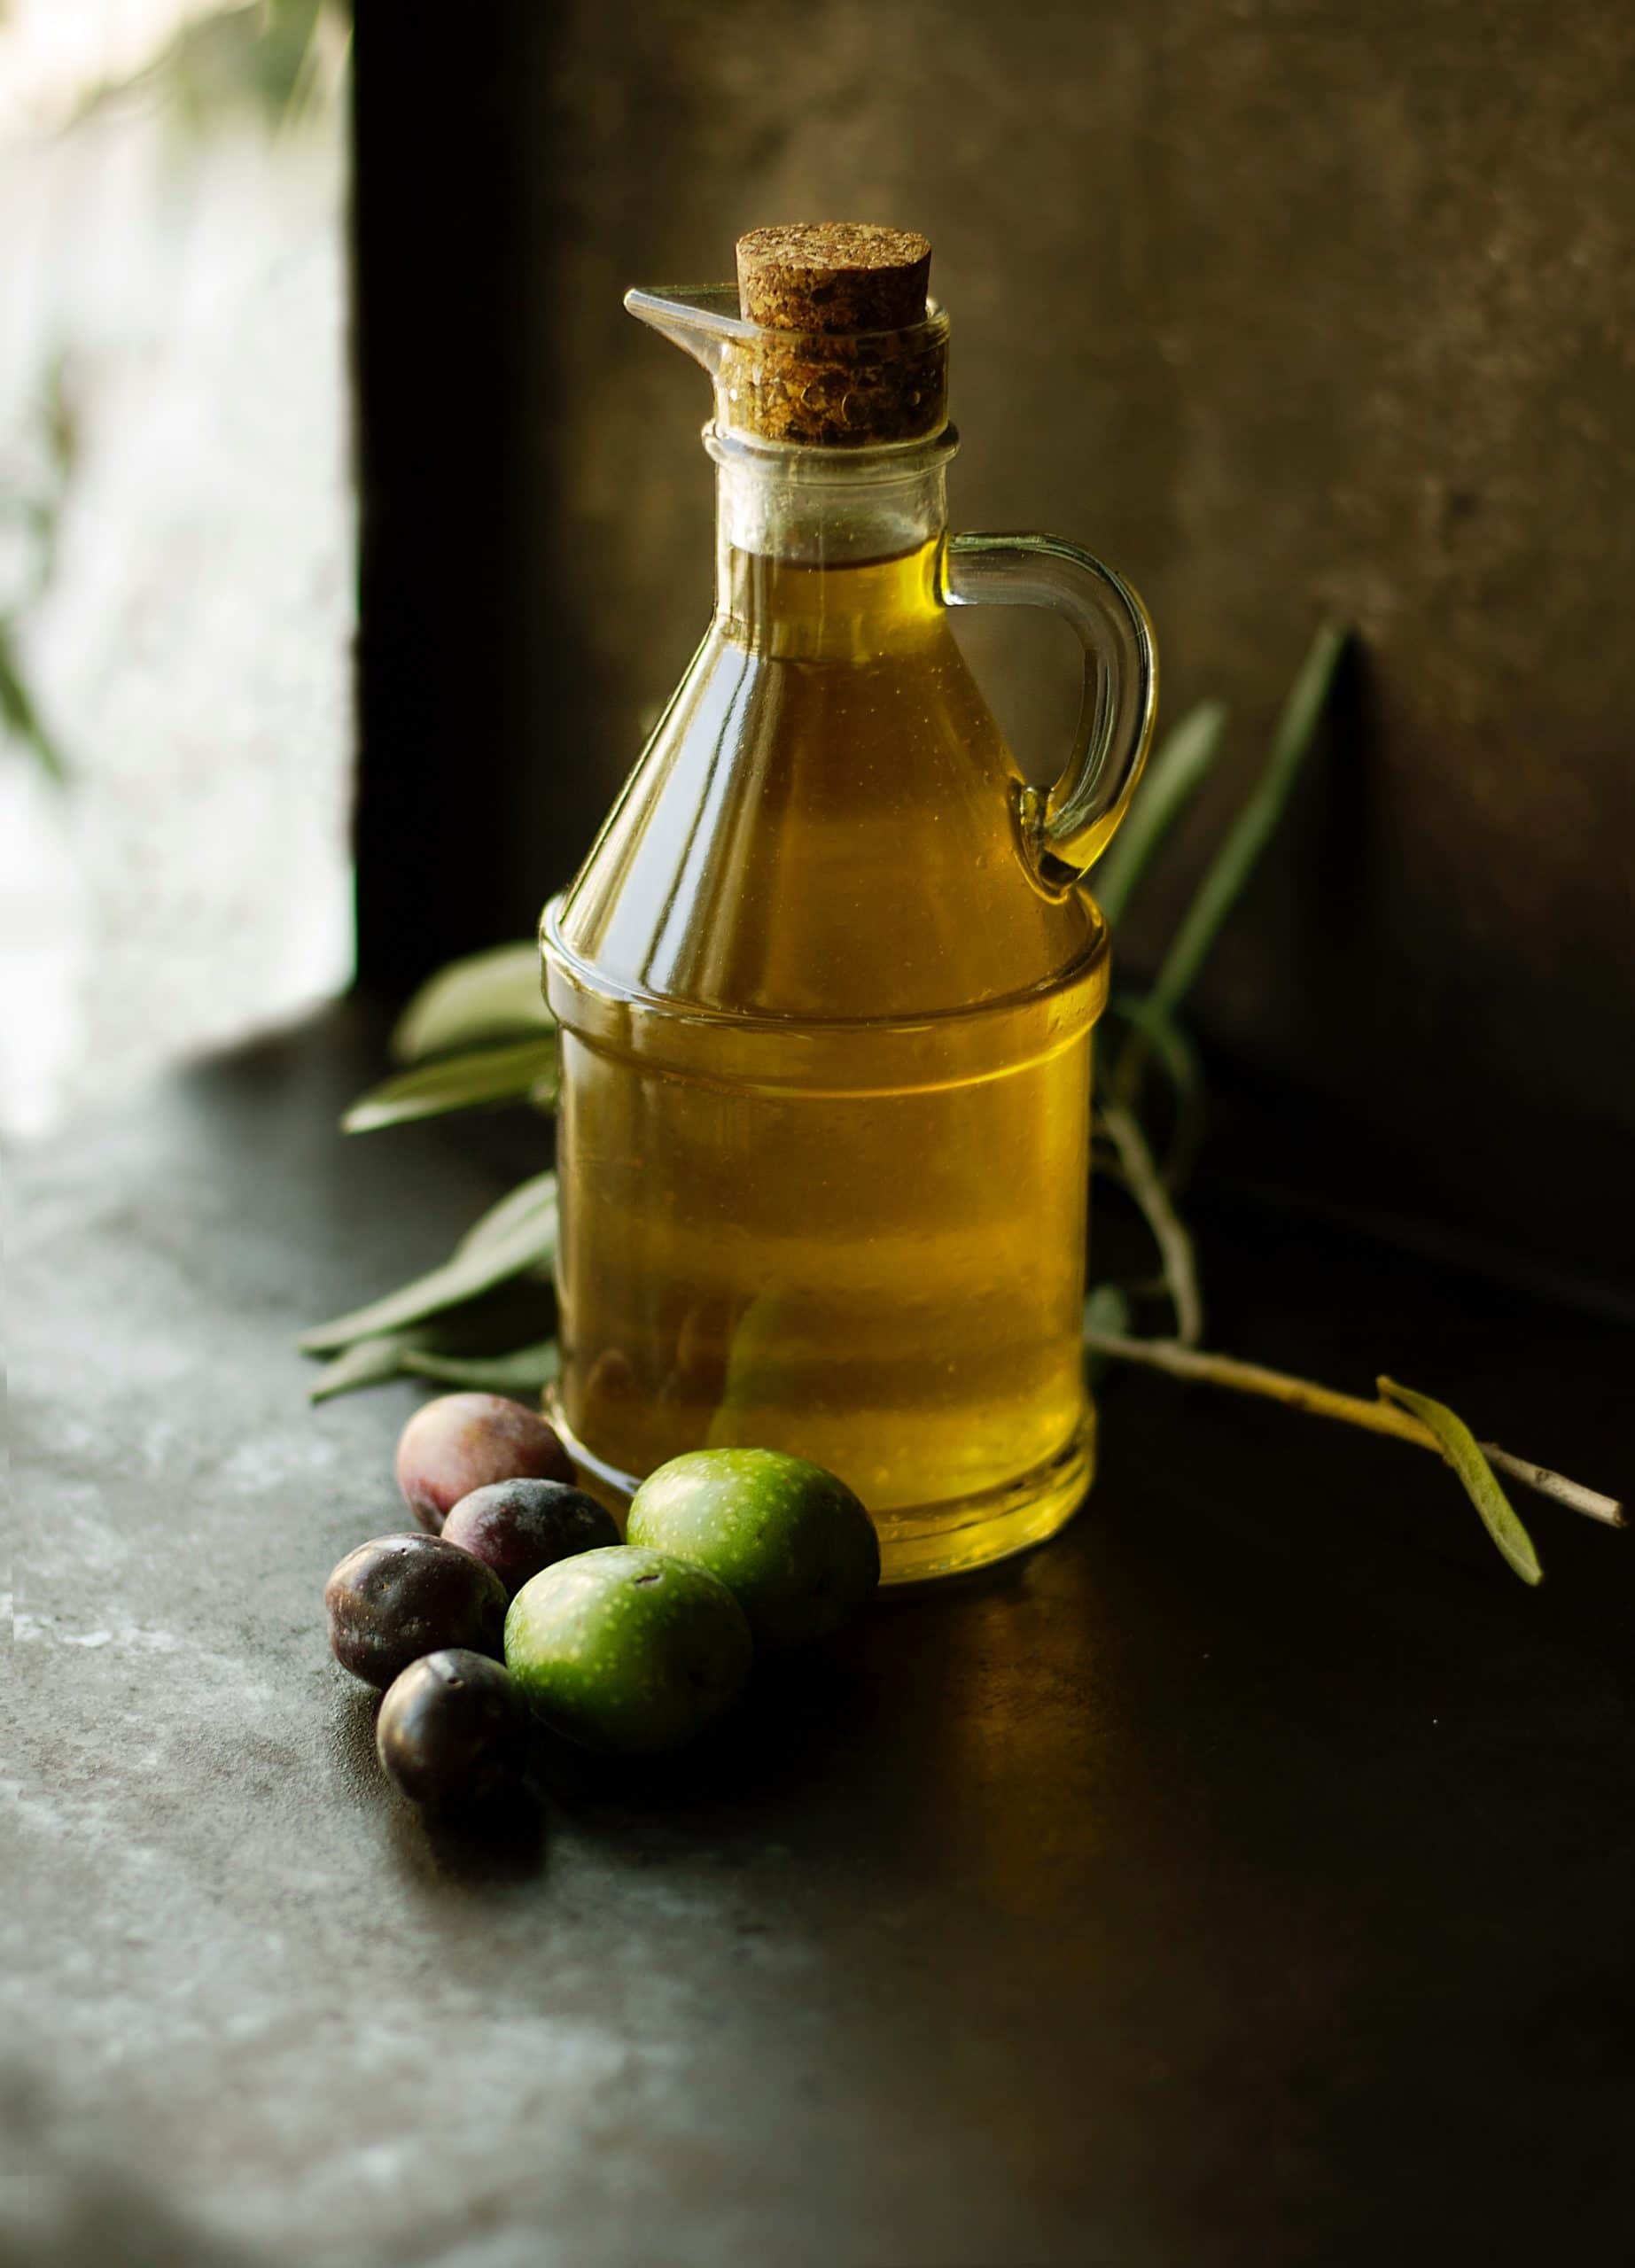 Jar of olive oil on a dark countertop with green and black olives